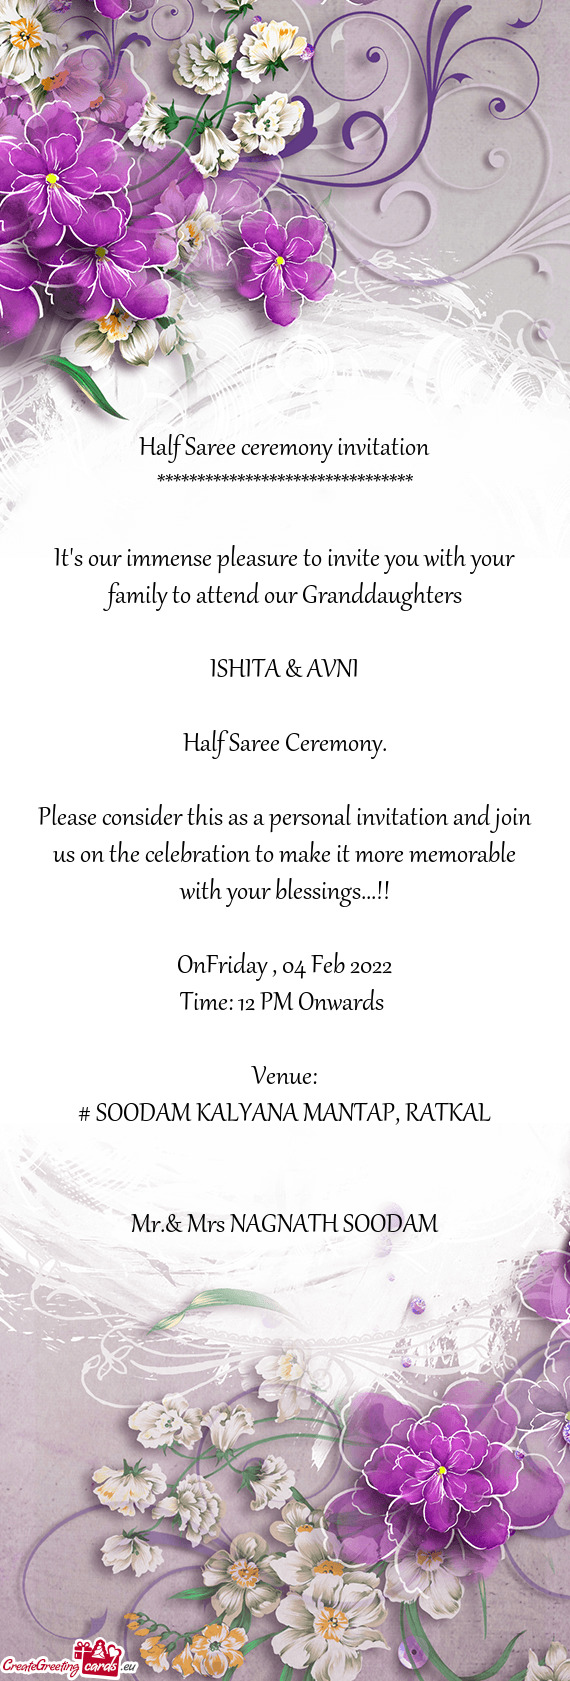 It's our immense pleasure to invite you with your family to attend our Granddaughters